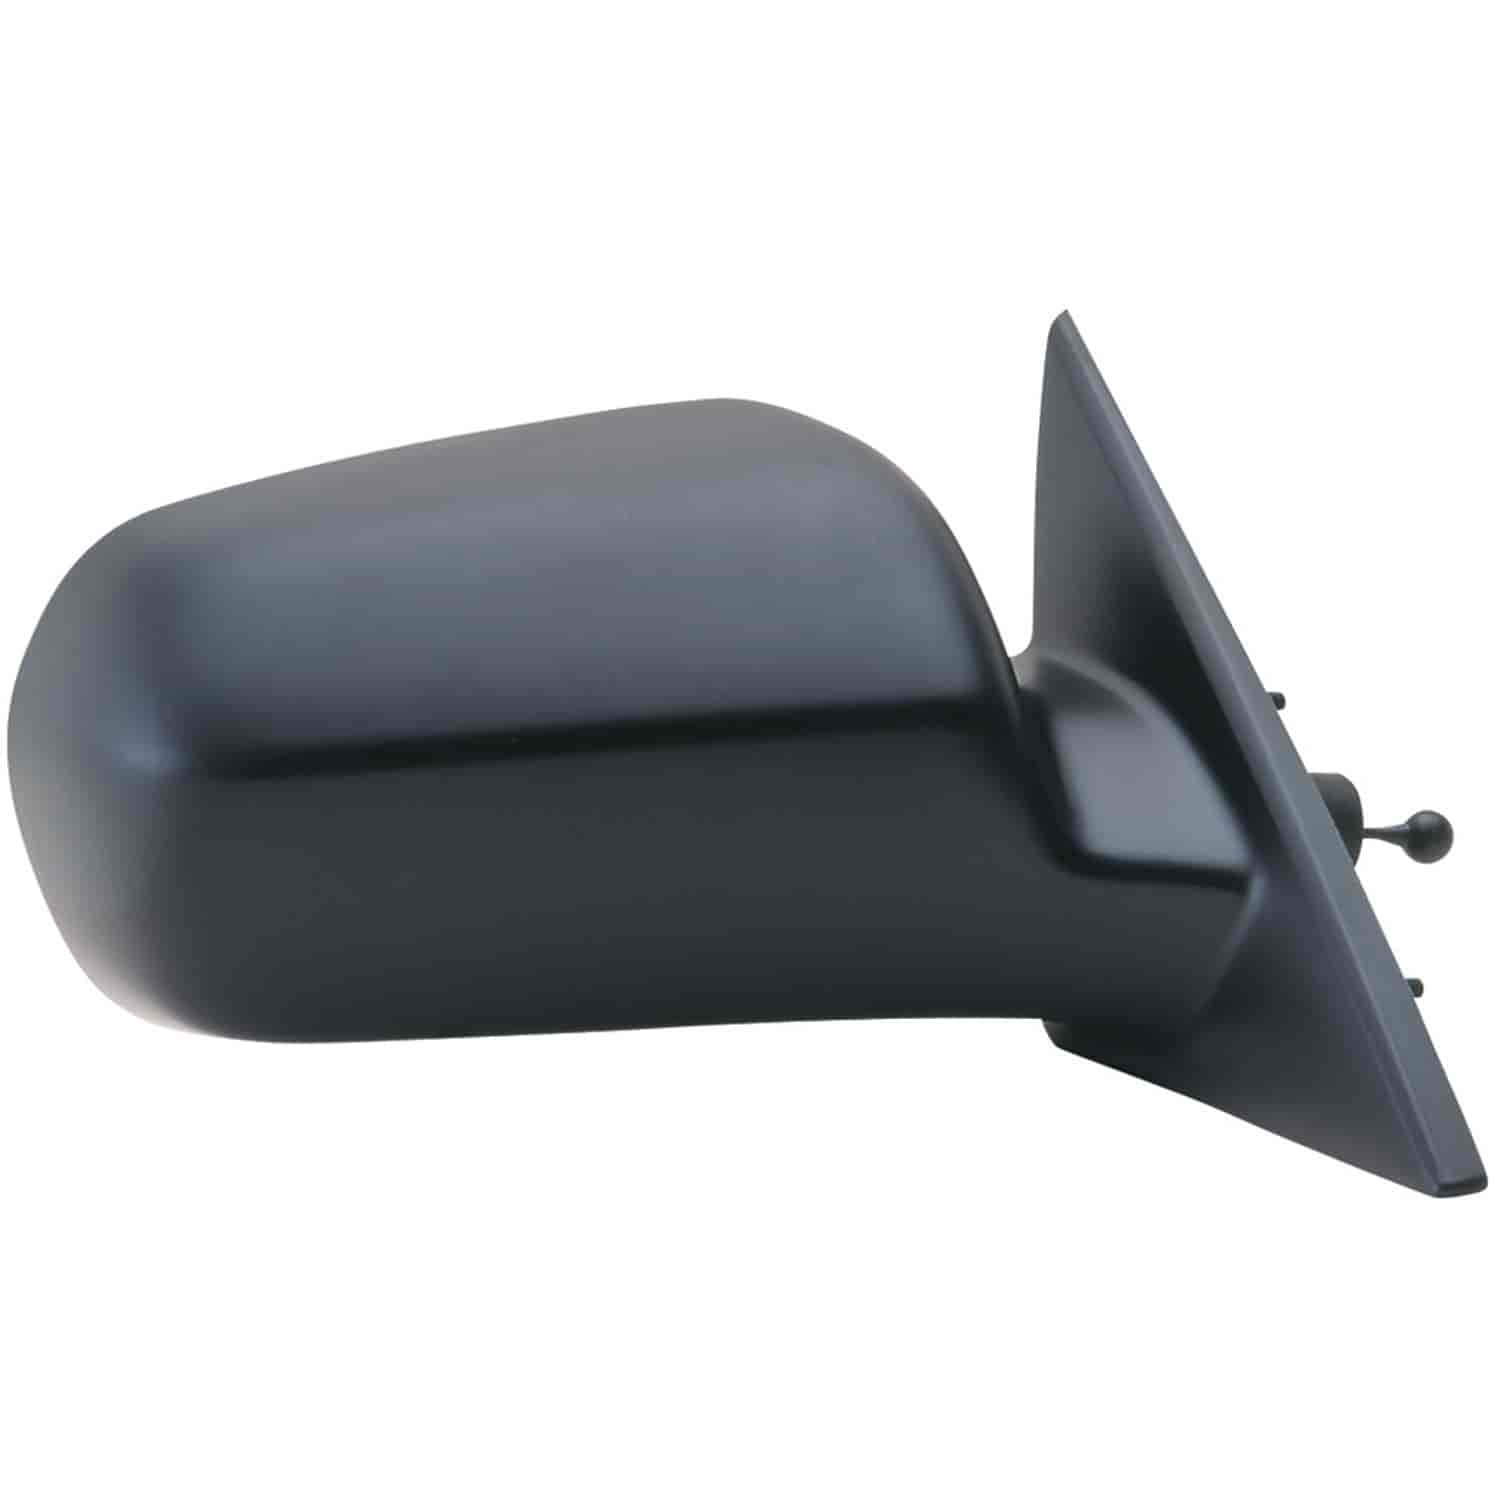 OEM Style Replacement mirror for 98-99 Honda Accord Sedan passenger side mirror tested to fit and fu